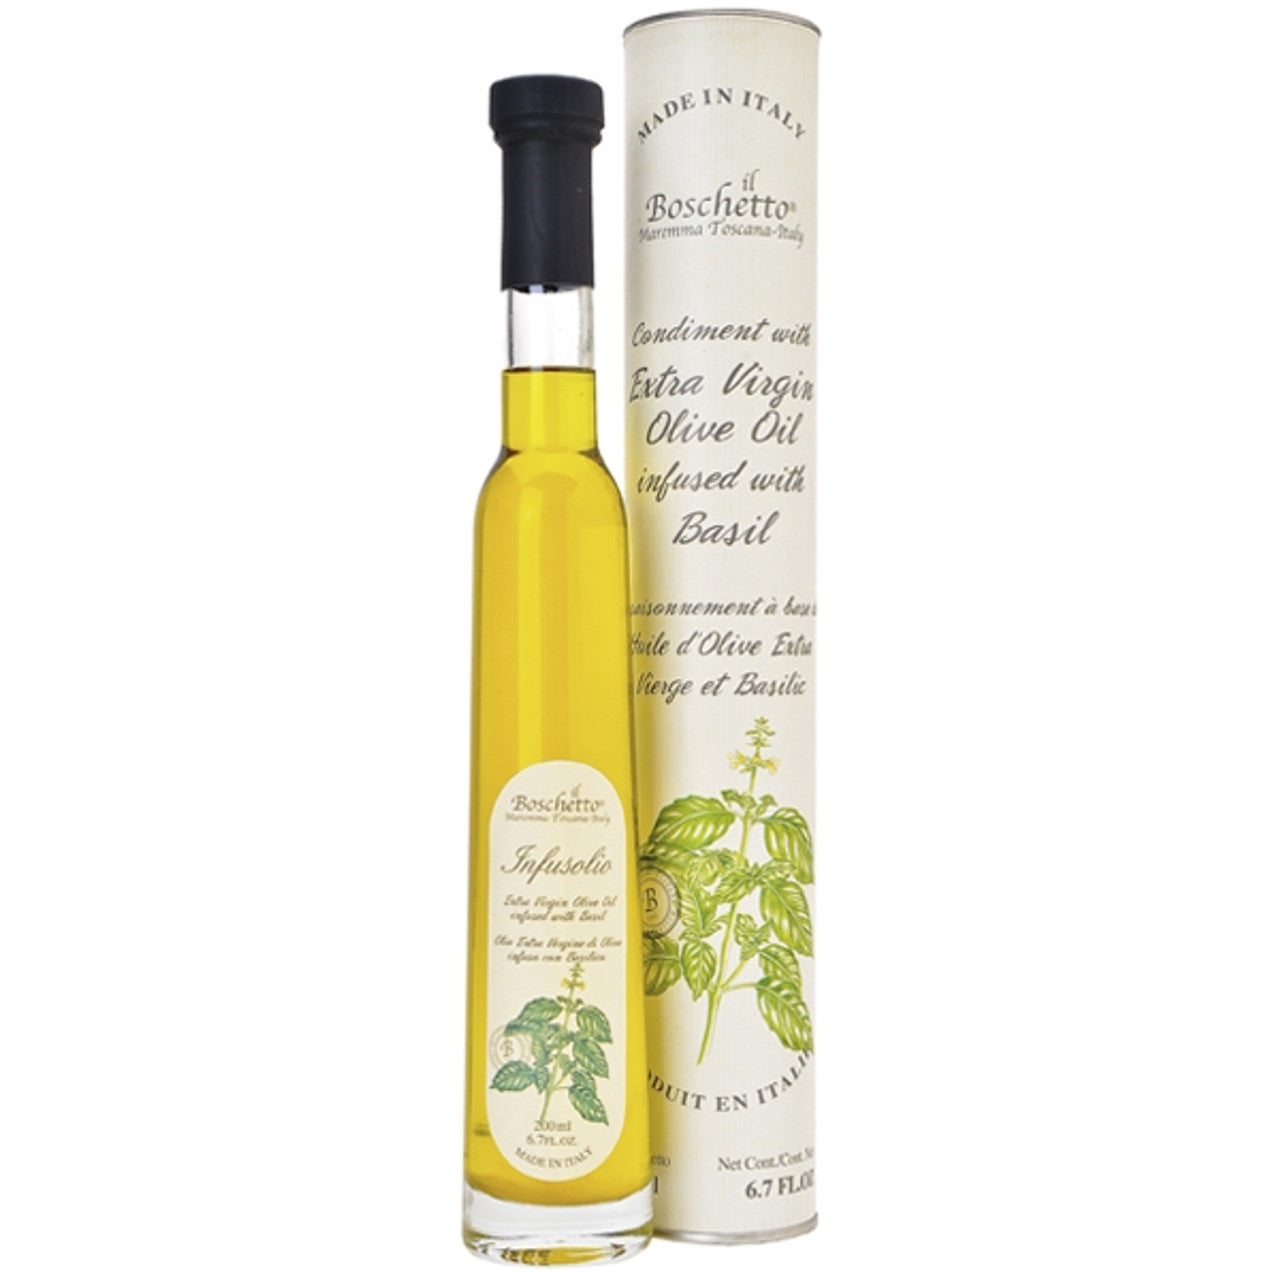 Il Boschetto Extra Virgin Olive Oil with Basil